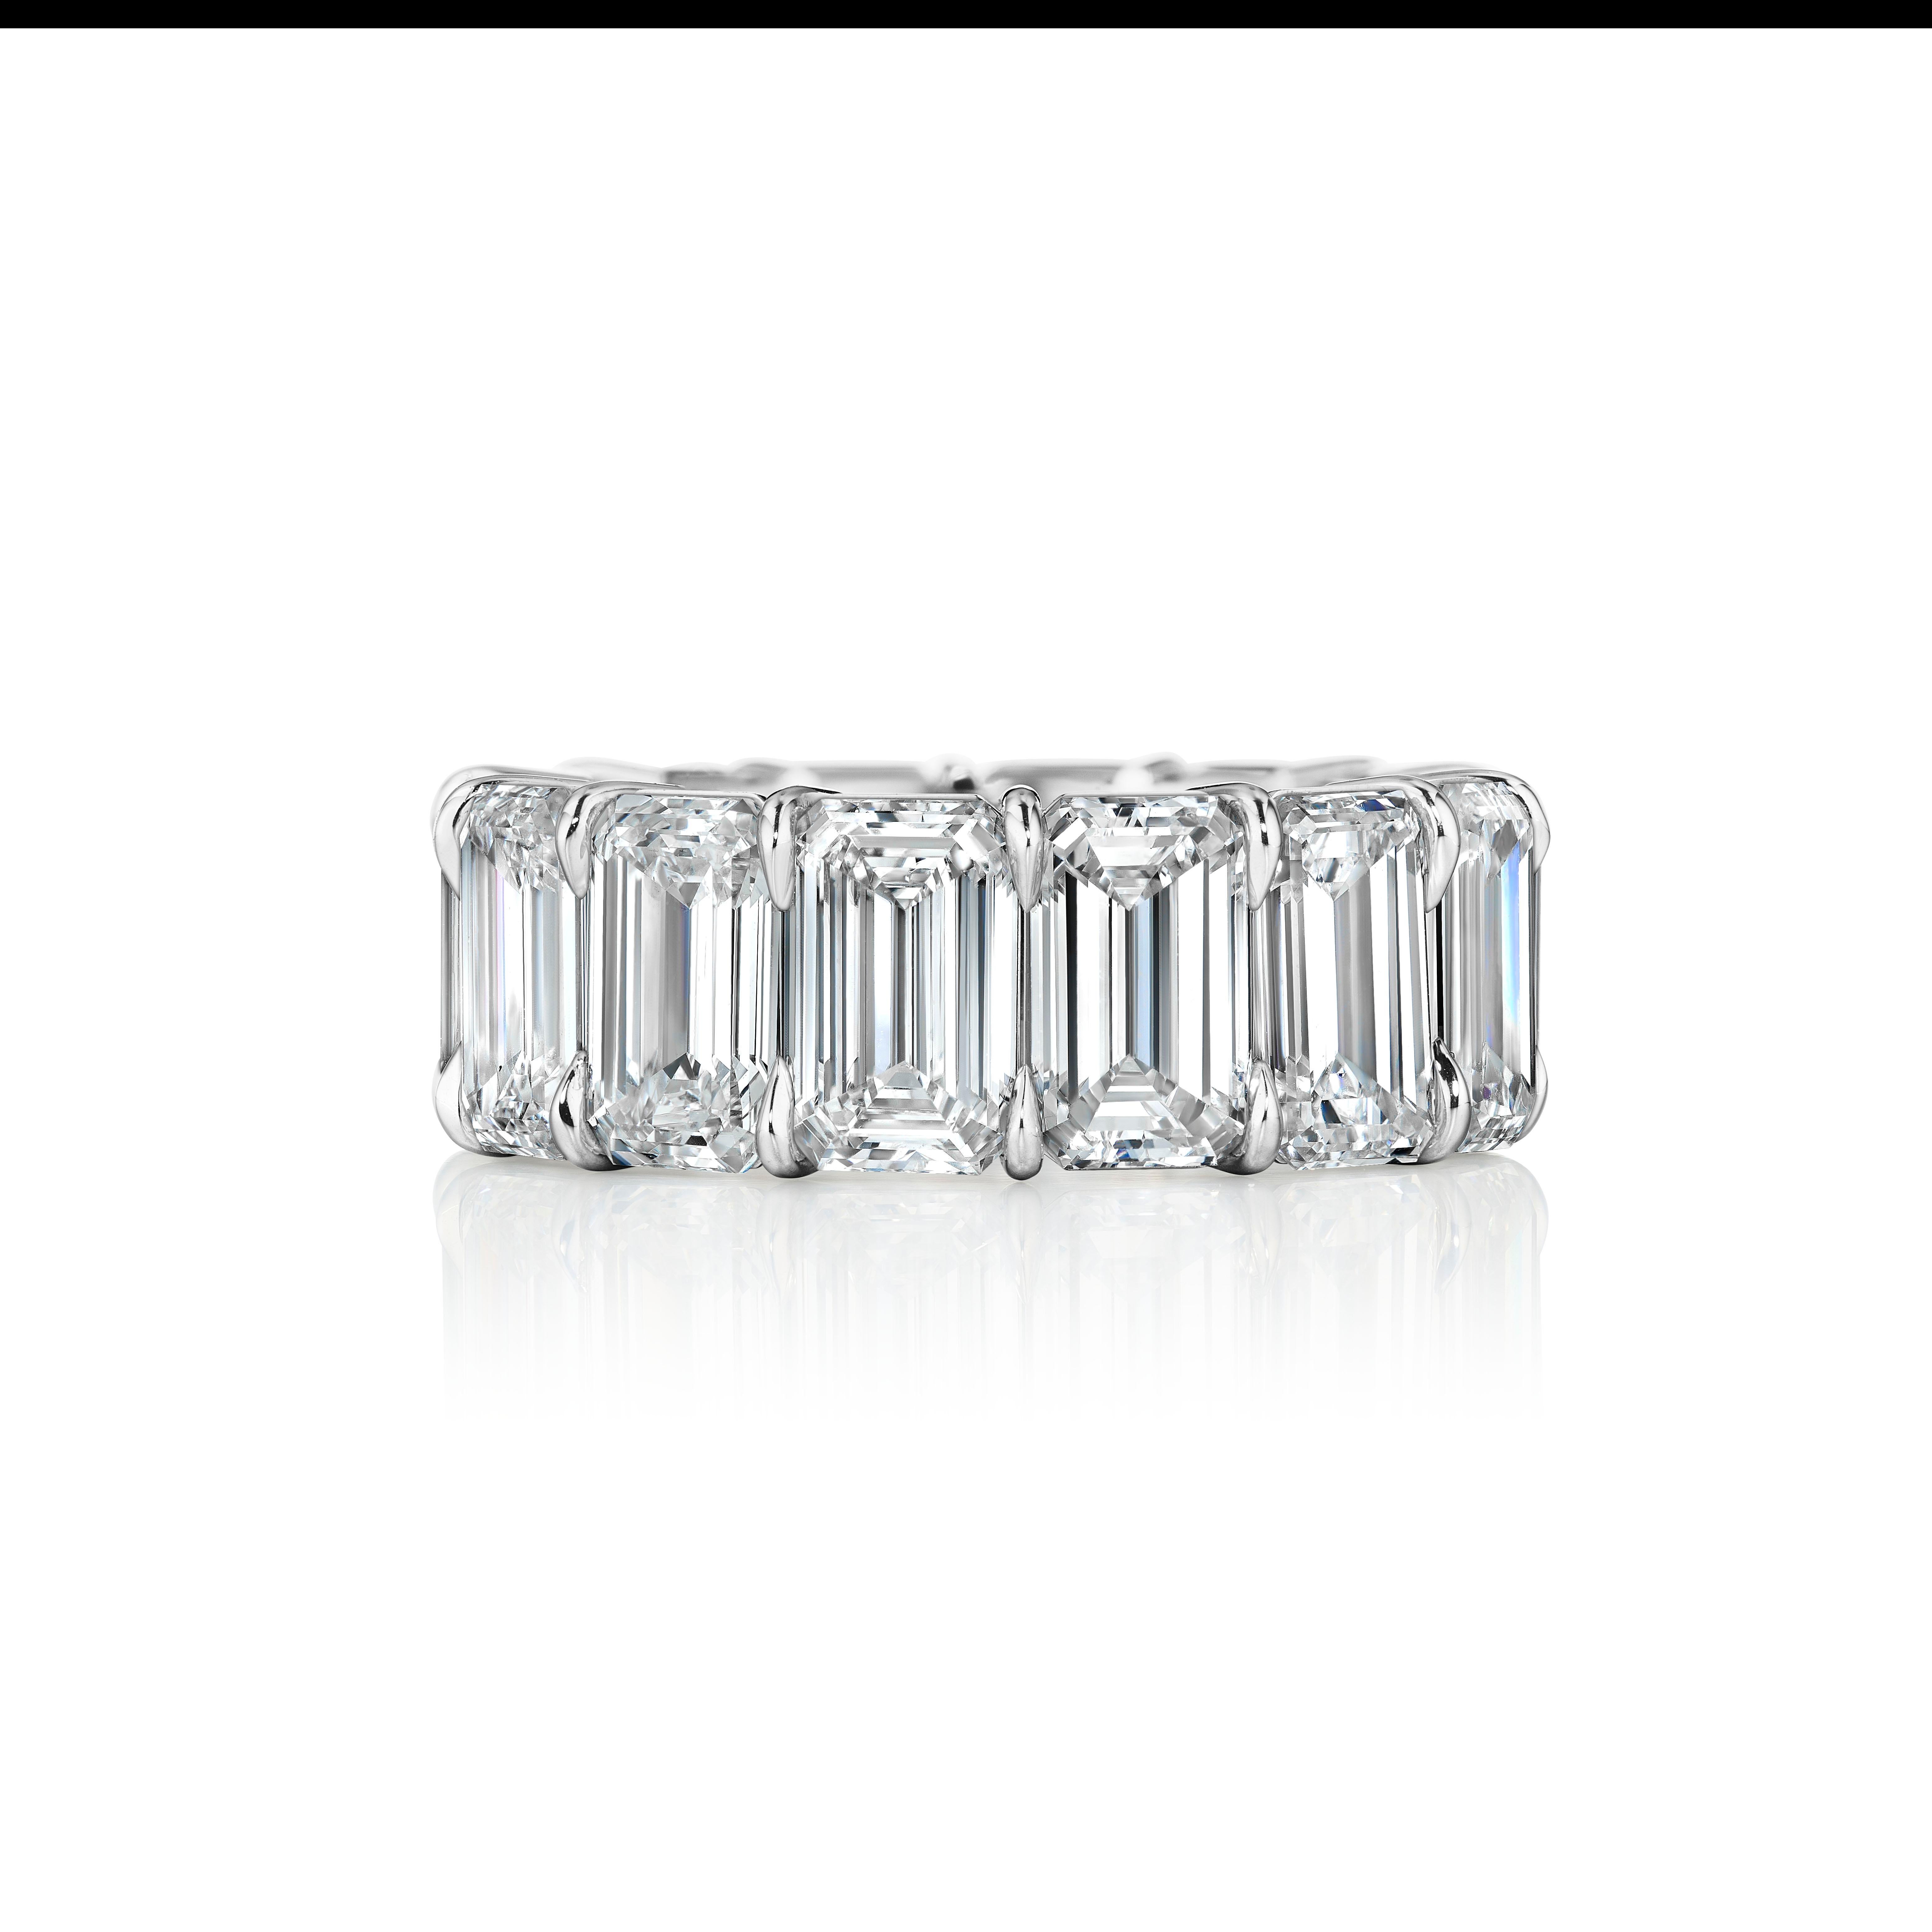 The Ultimate Emerald Cut Eternity Band.
14 Perfectly Matched Emerald Cuts each weighing over 1.00 Carat for 14.31 Carats in Total.
E-F Color and VS-VVS Clarity.
Set in a Platinum Handmade Classic Setting.
Set with super elongated stones.
Size 6.